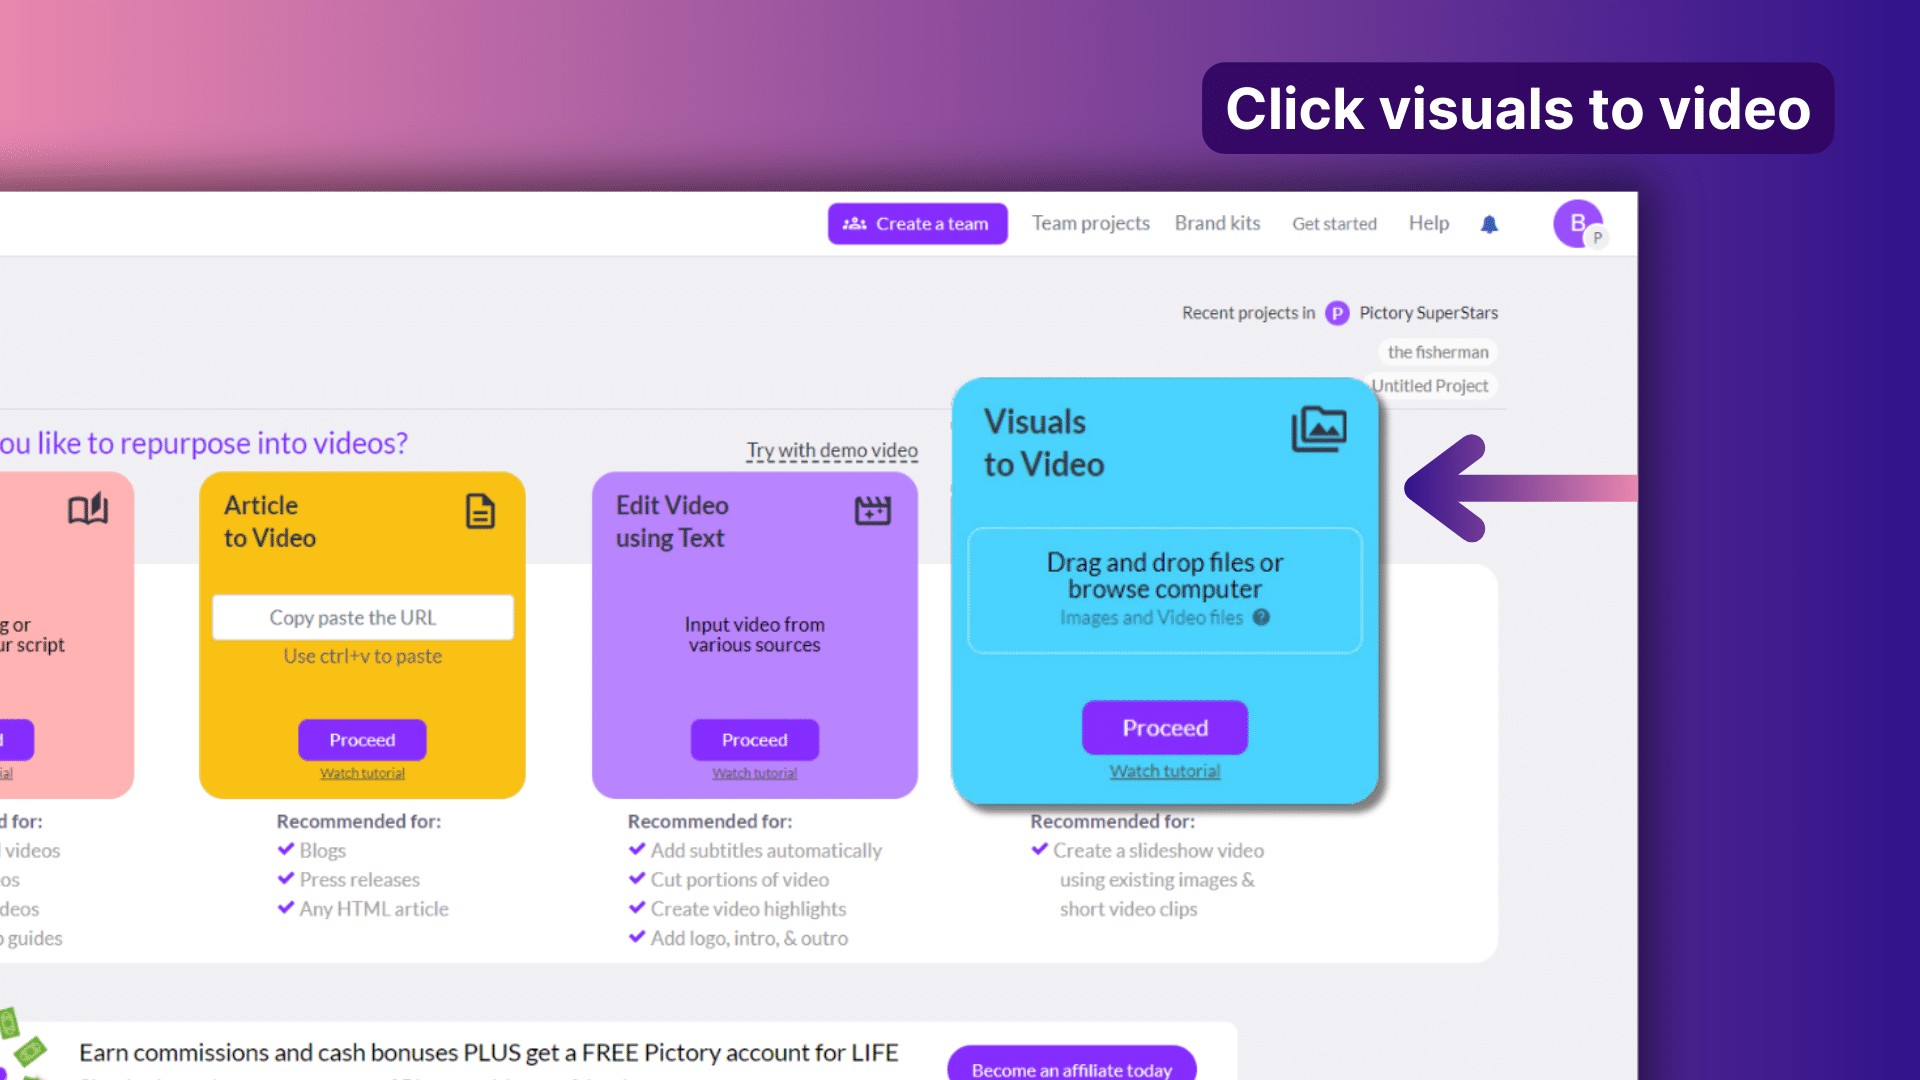 Visuals to Video feature in Pictory